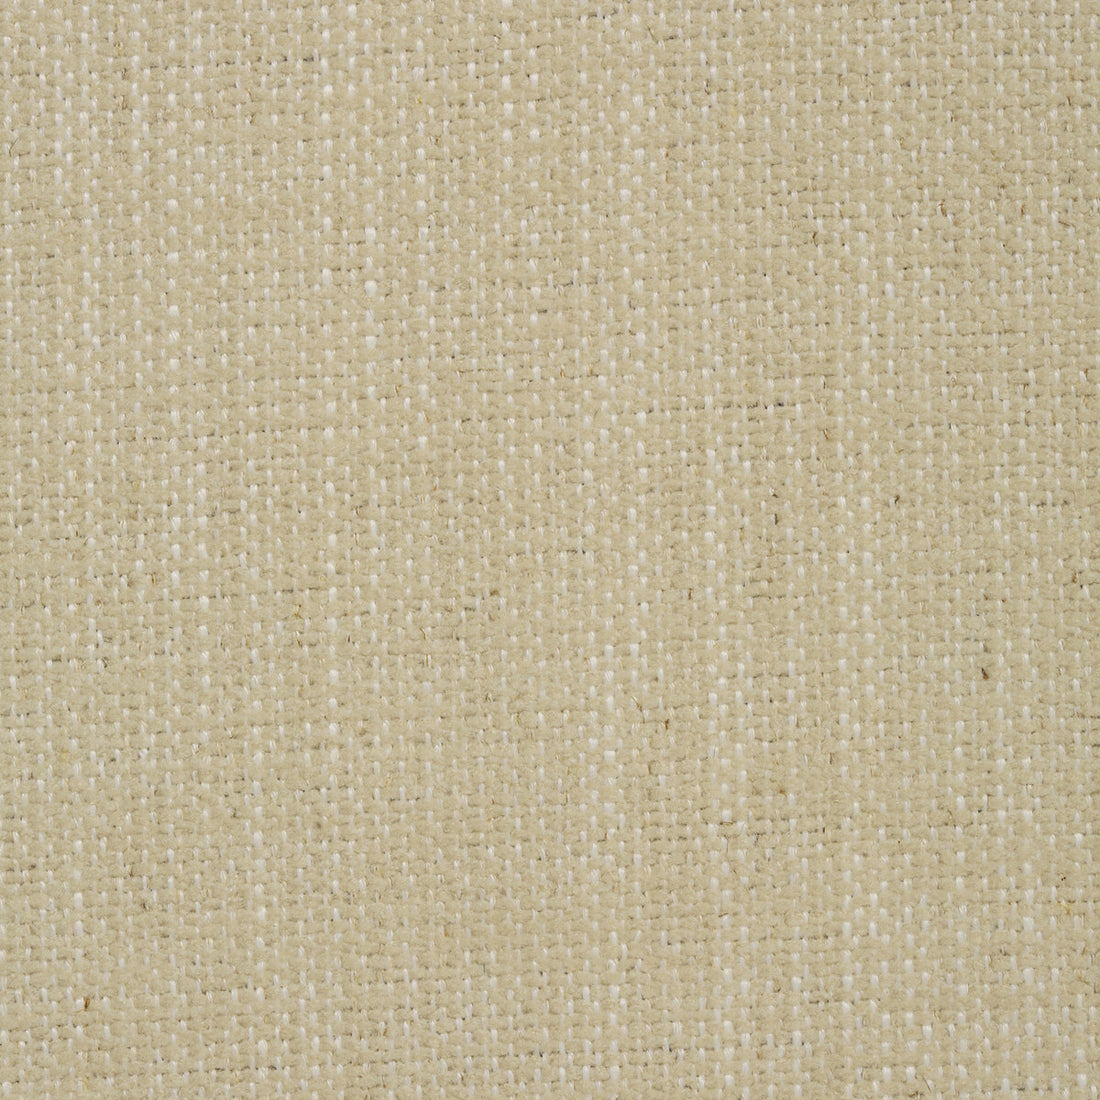 Kravet Smart fabric in 35111-116 color - pattern 35111.116.0 - by Kravet Smart in the Performance Crypton Home collection